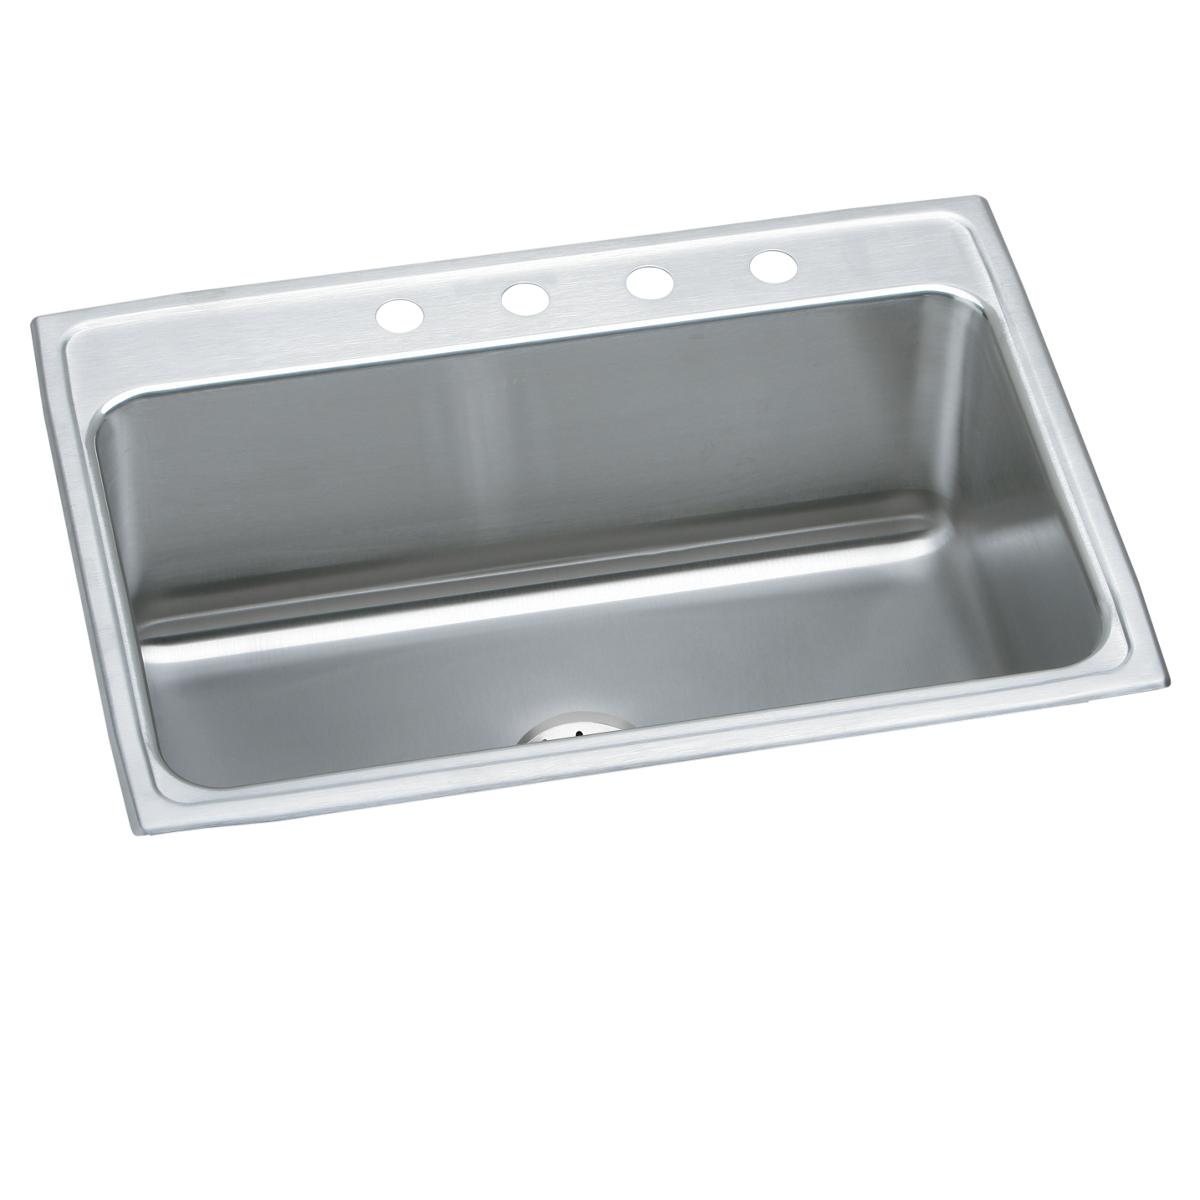 Elkay Lustertone Classic 31" x 22" x 10-1/8" Single Bowl Drop-in Sink with Perfect Drain